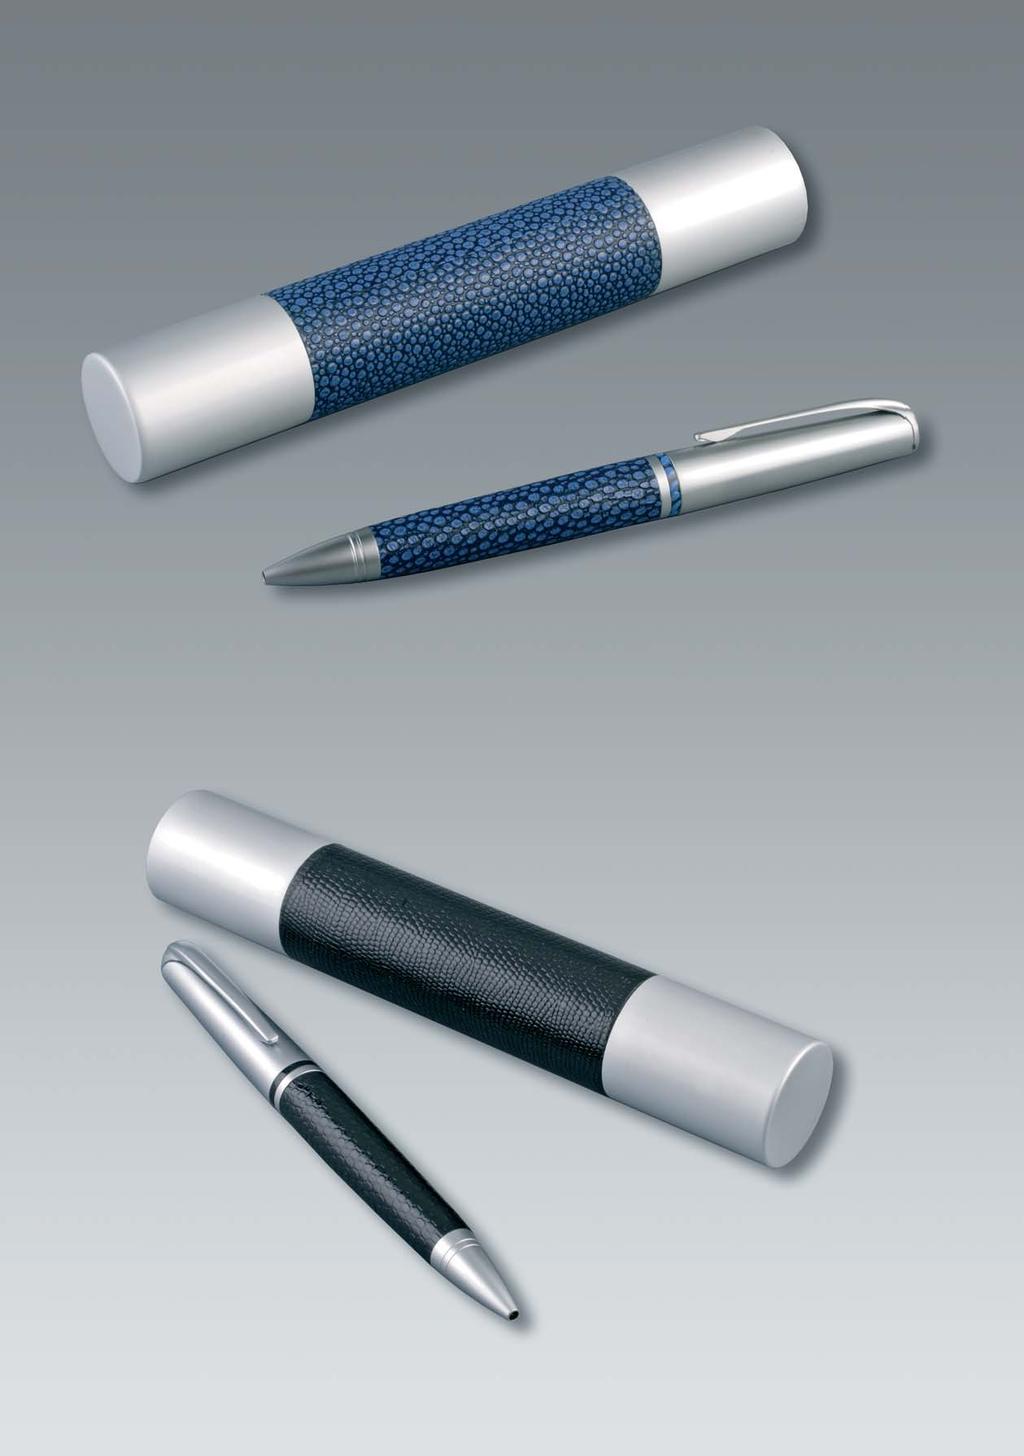 Article 130G12: metal set with twist ball pen article 130, with leather optic, blue ink., incl.